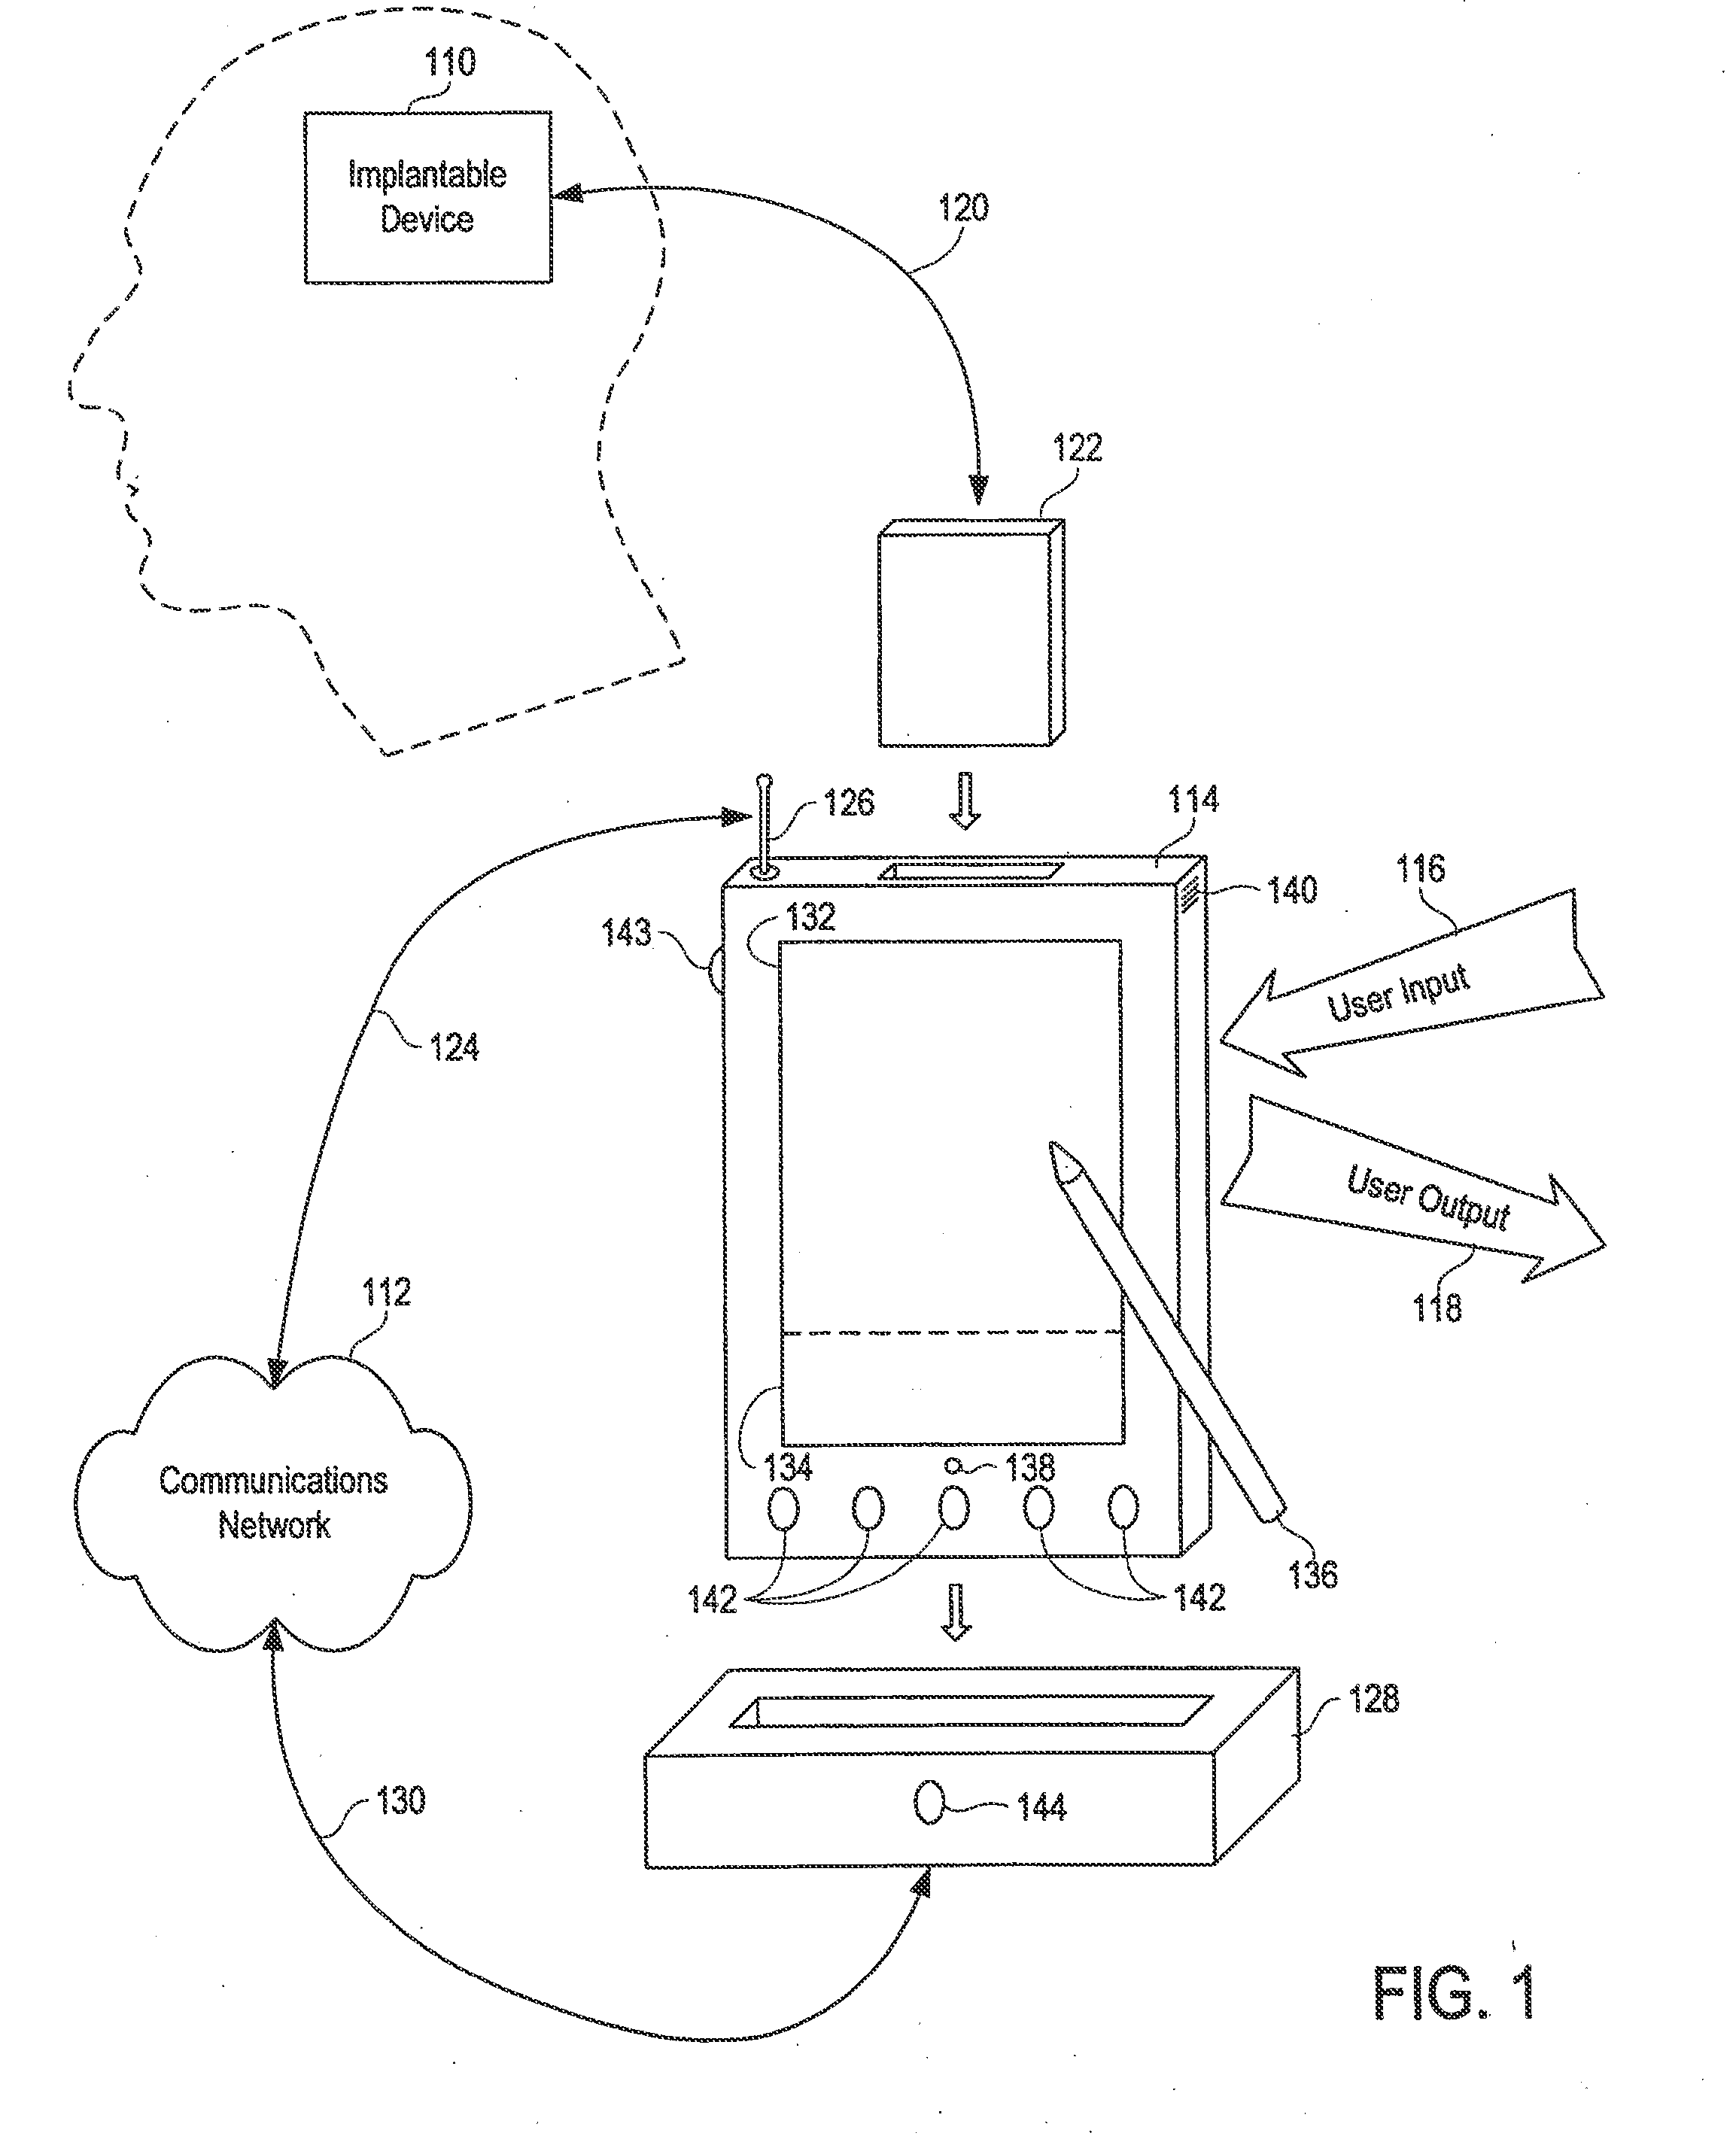 Systems and methods for interacting with an implantable medical device